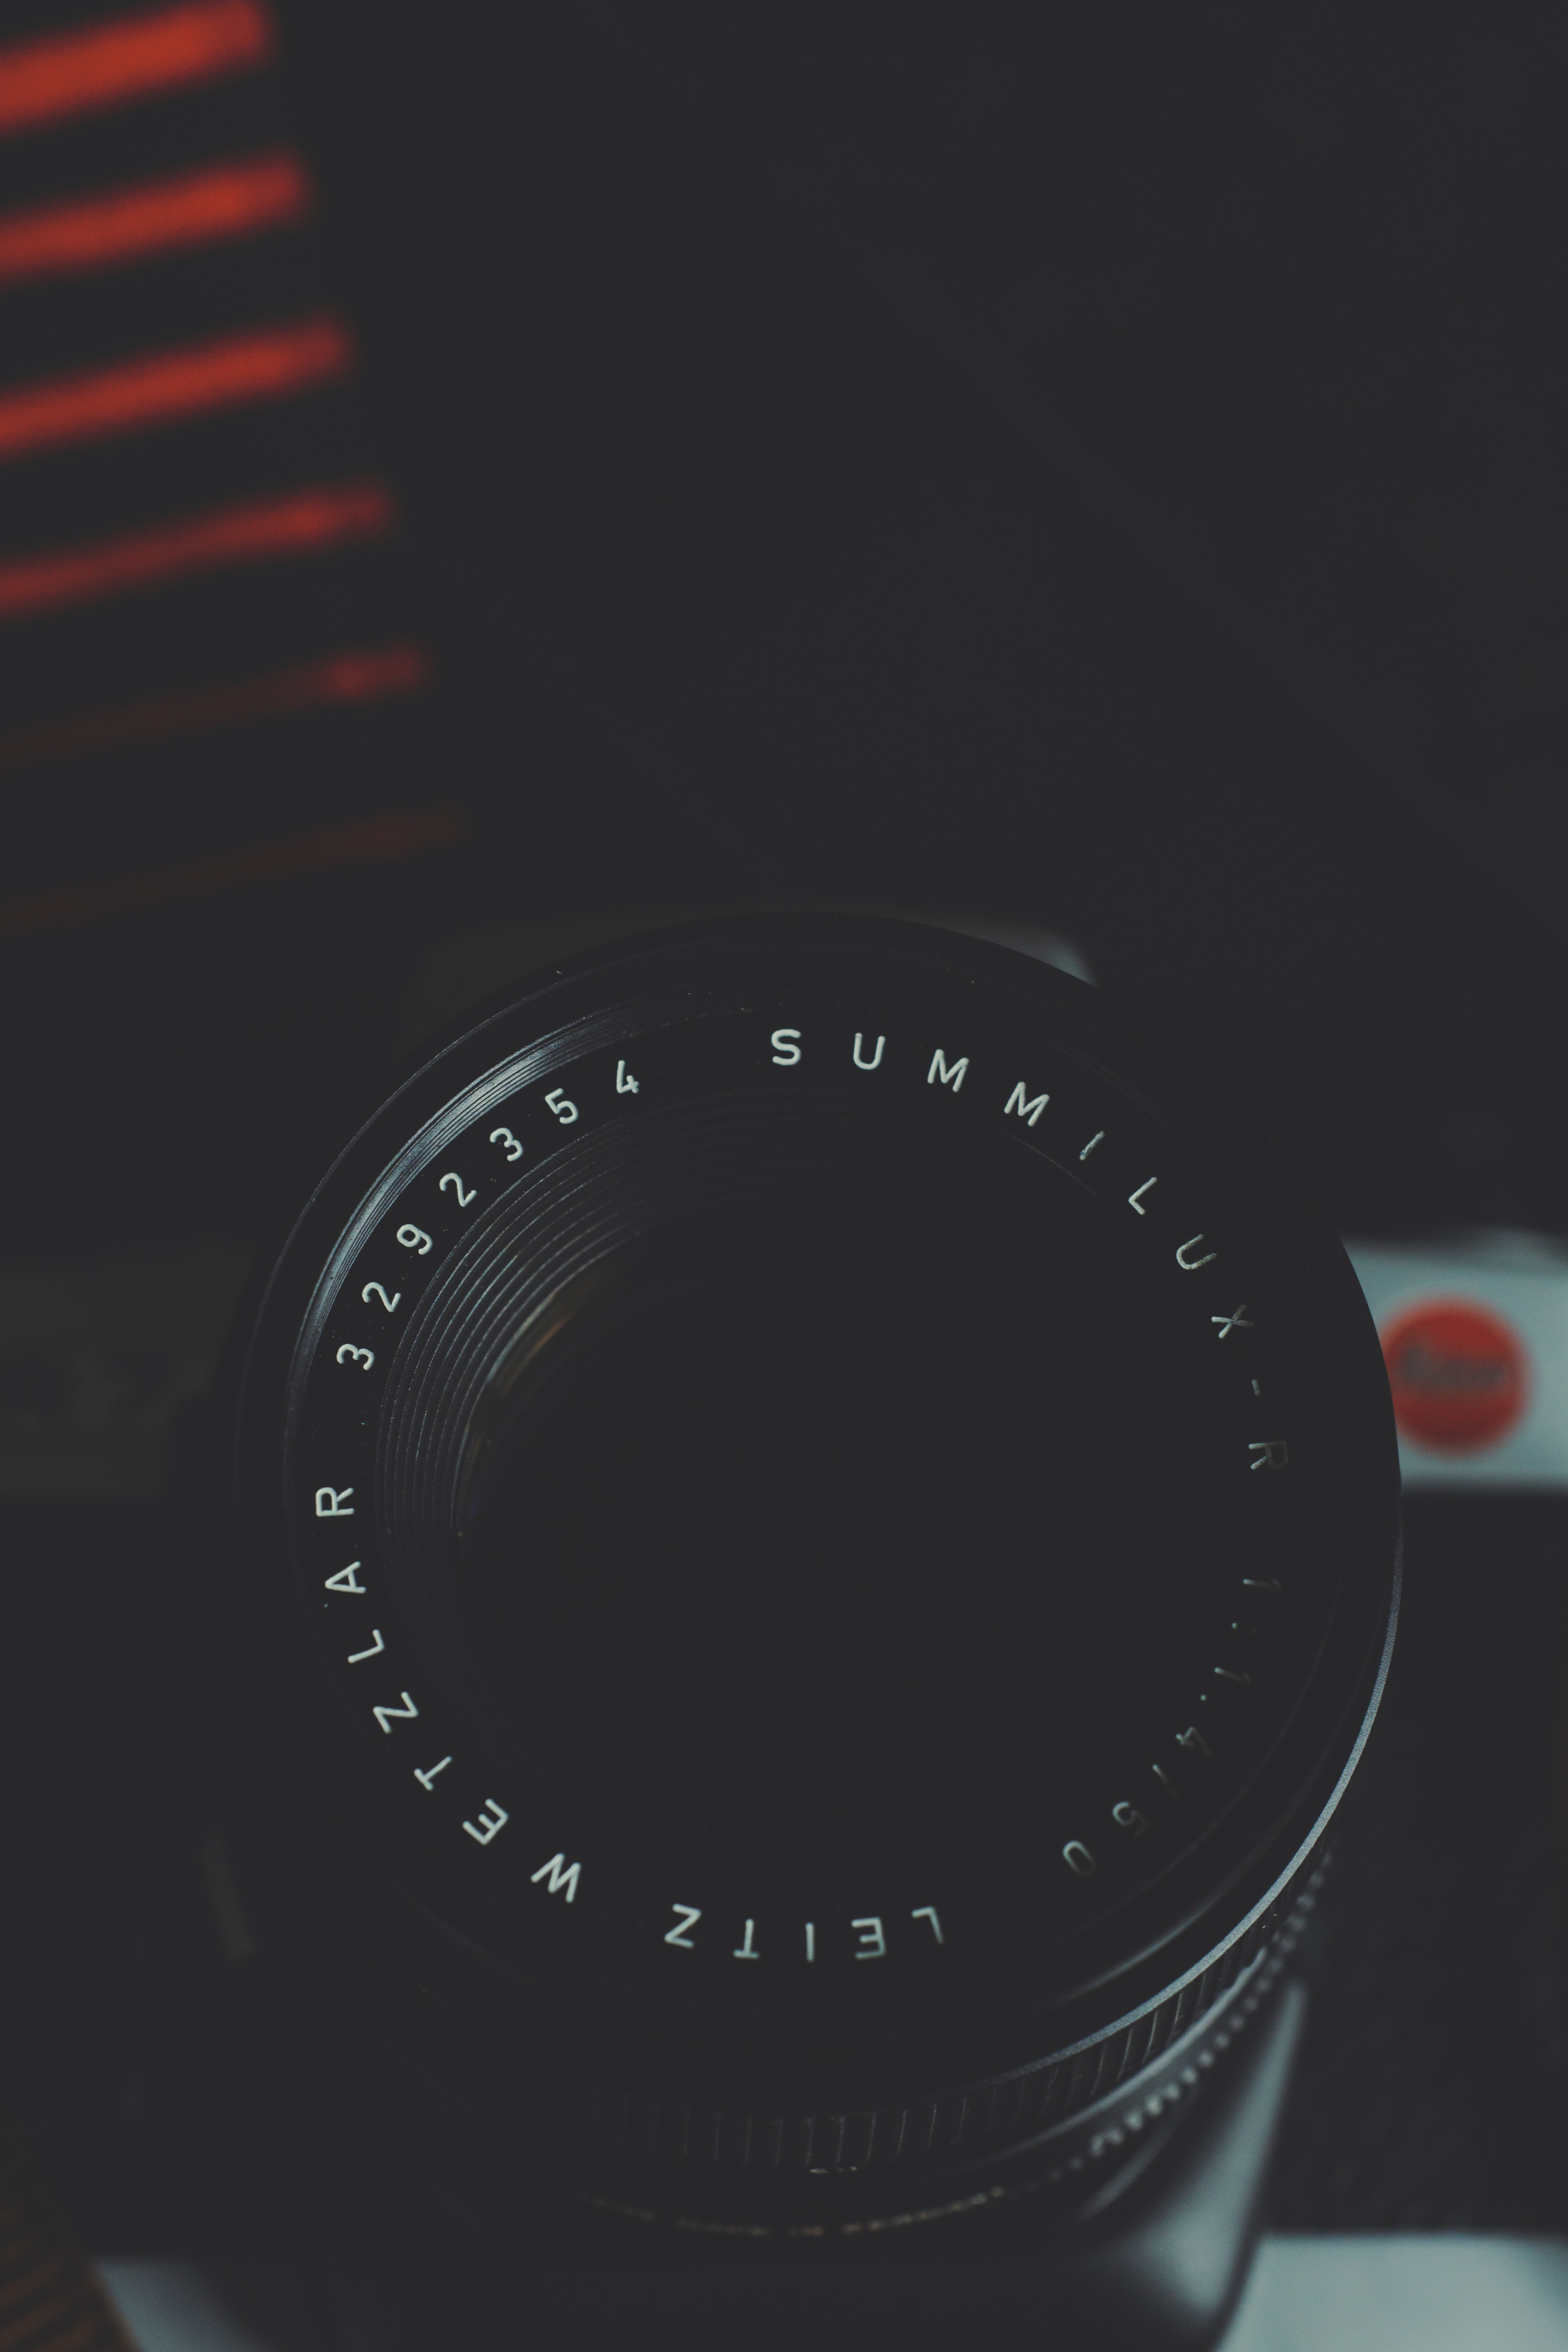 dark, lens, technologies, technology, numbers, camera, letters